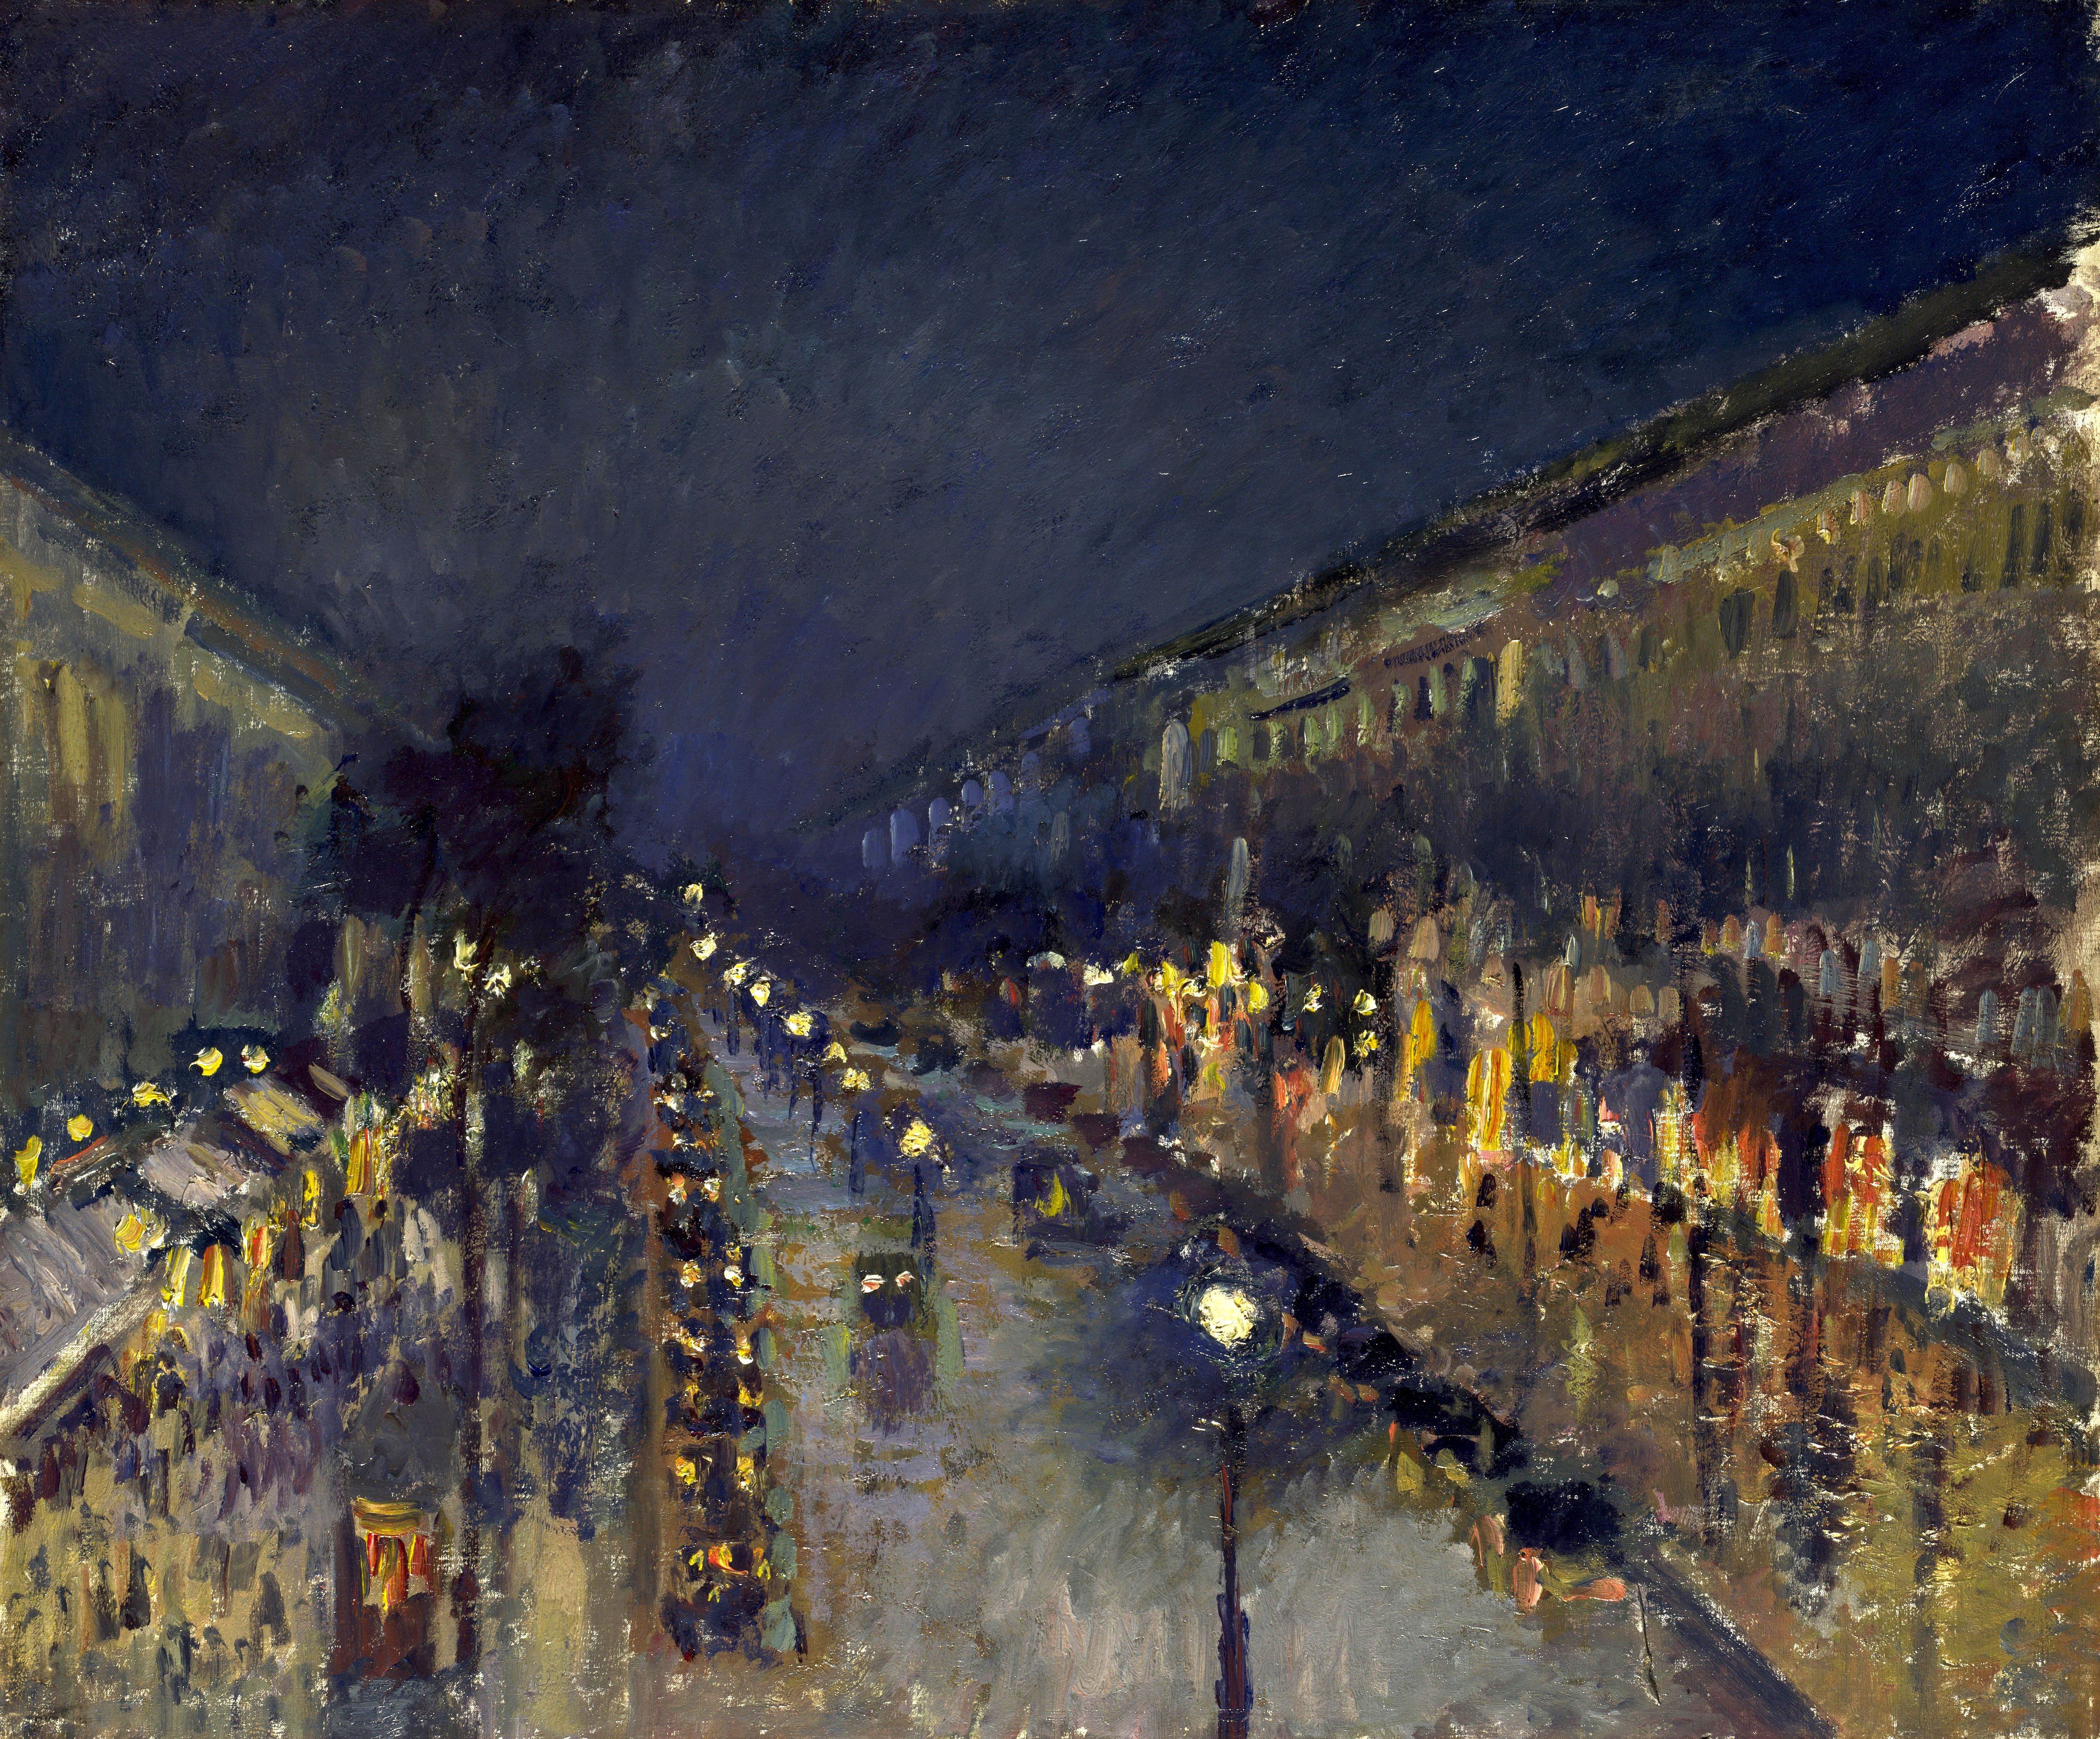 Camille Pissarro, The Boulevard Montmartre at Night